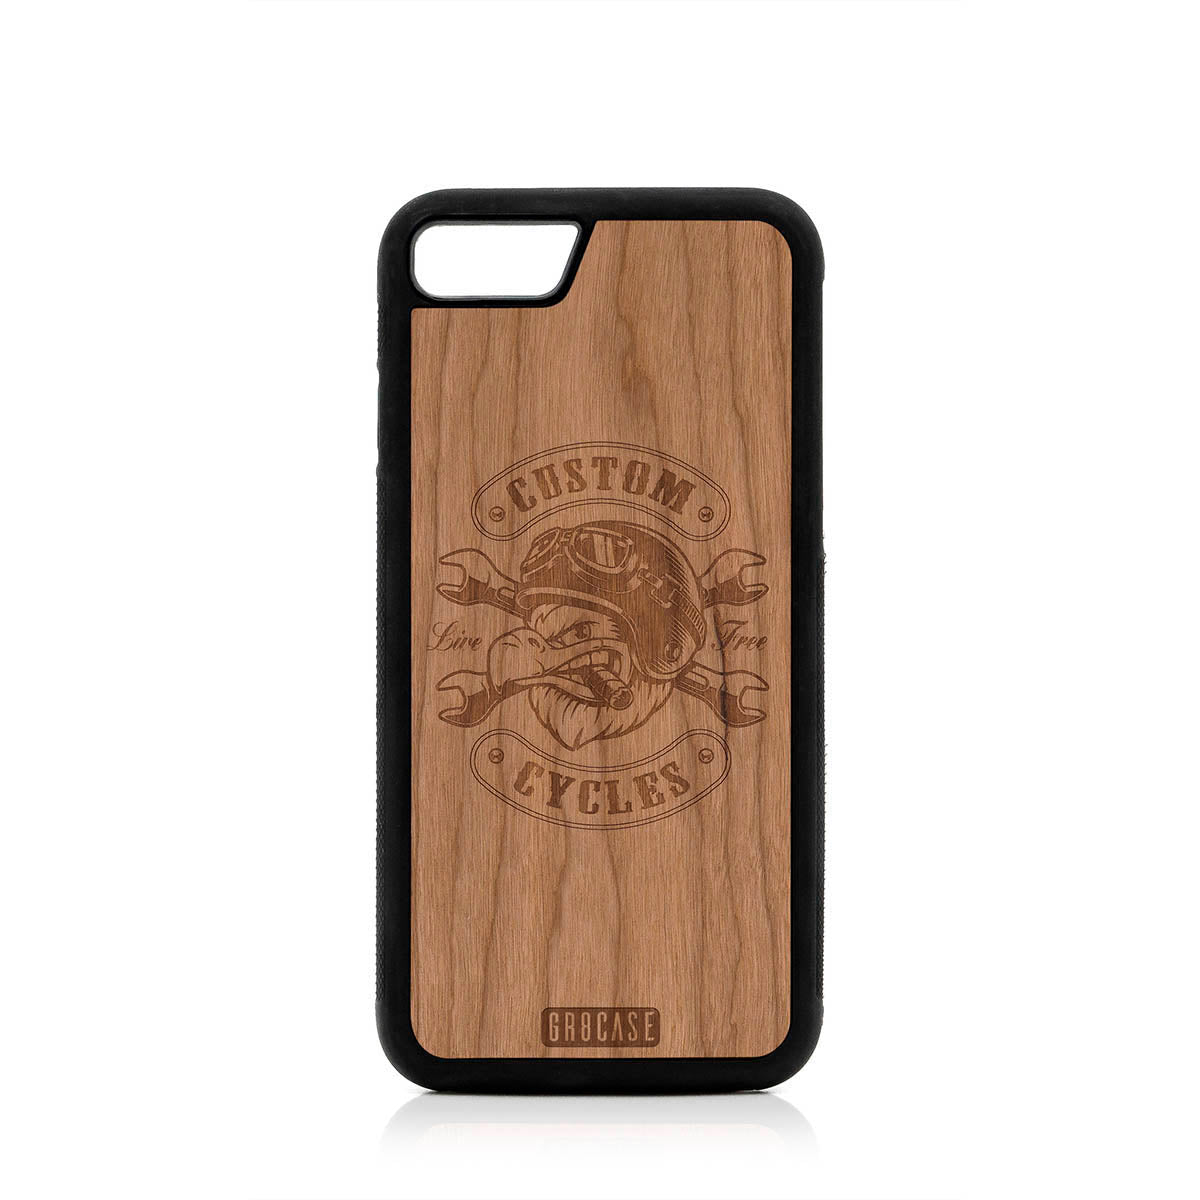 Custom Cycles Live Free (Biker Eagle) Design Wood Case For iPhone SE 2020 by GR8CASE